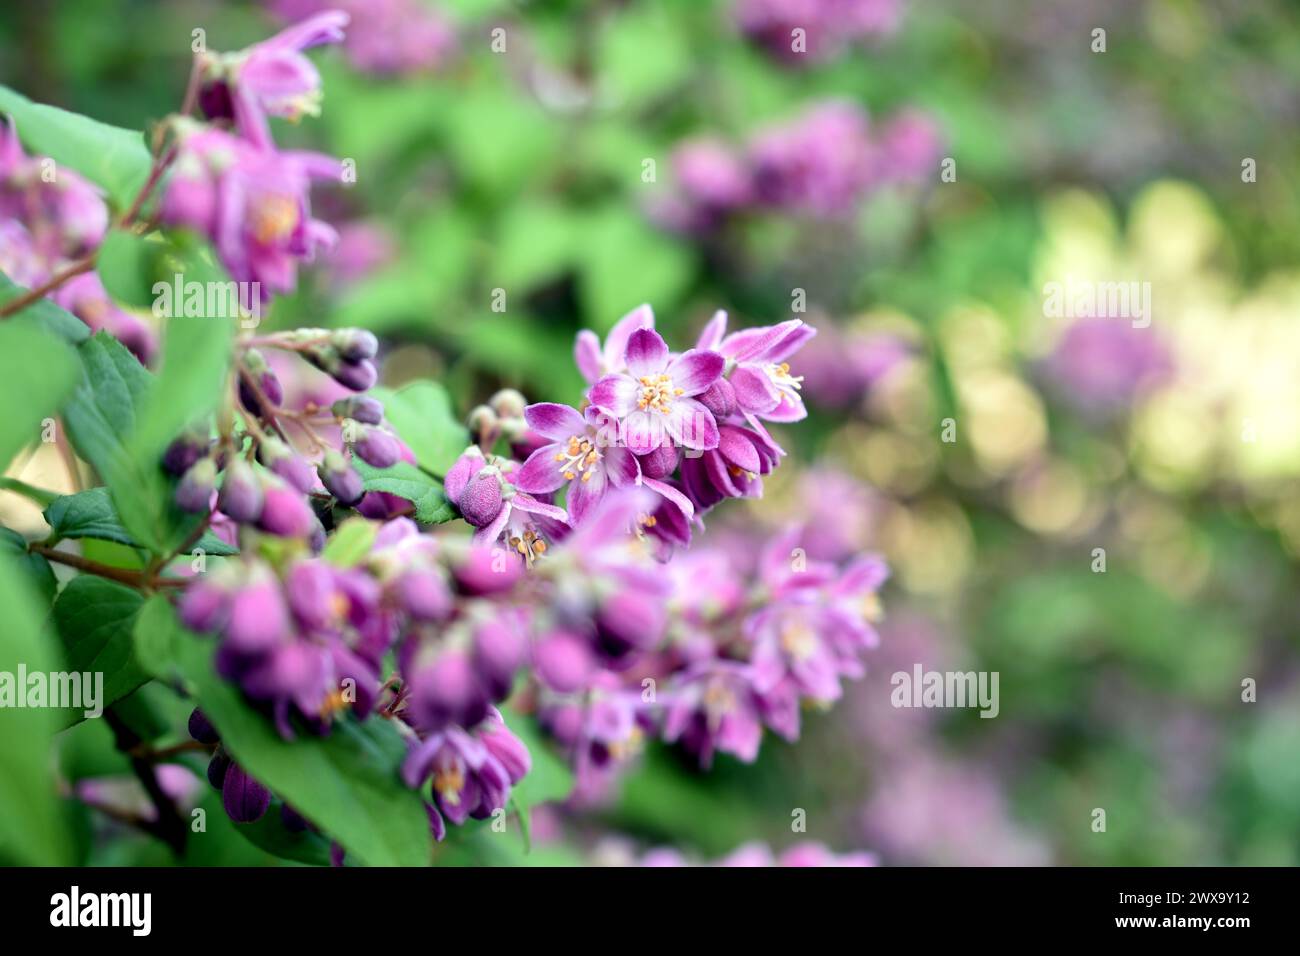 Greeting card. Pink clusters of deutzia flowers are photographed against a background of green leaves. Stock Photo